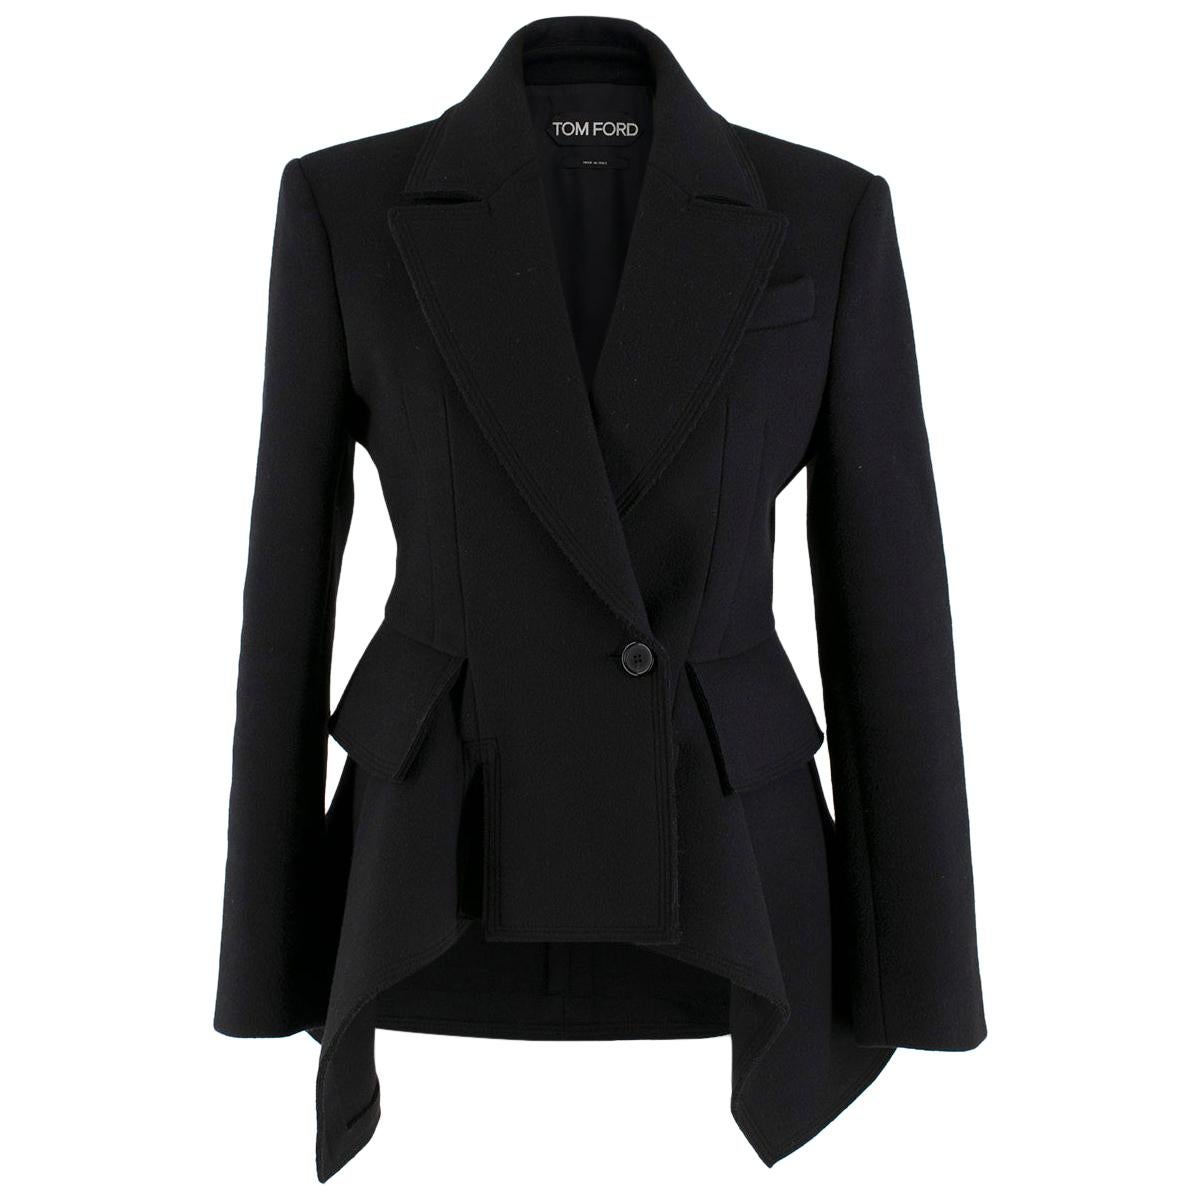 Tom Ford Double Breasted Cashmere Blend Jacket SIZE 38